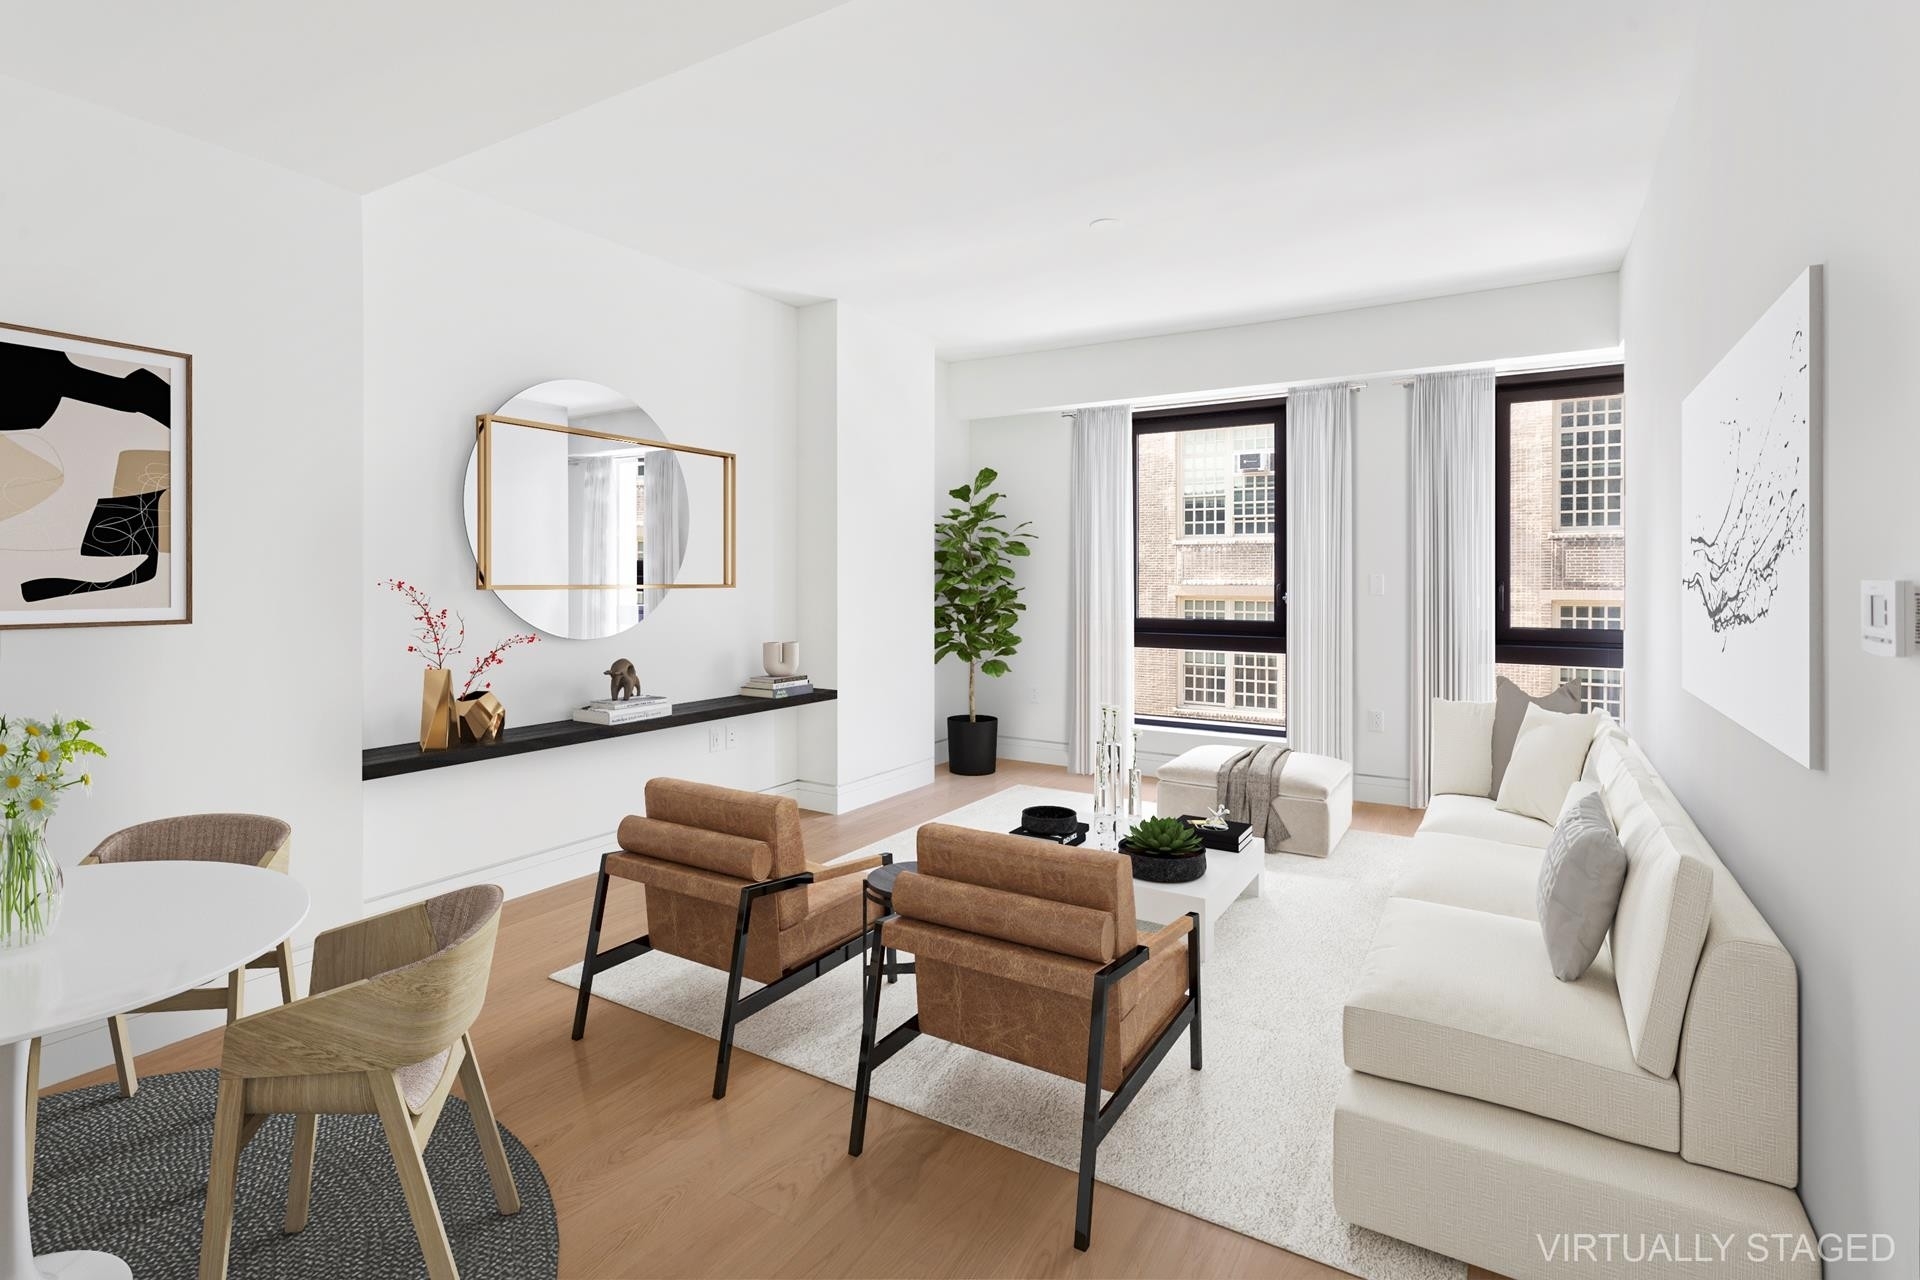 Condominium for Sale at Essex Crossing, 242 BROOME ST, 5A Lower East Side, New York, NY 10002